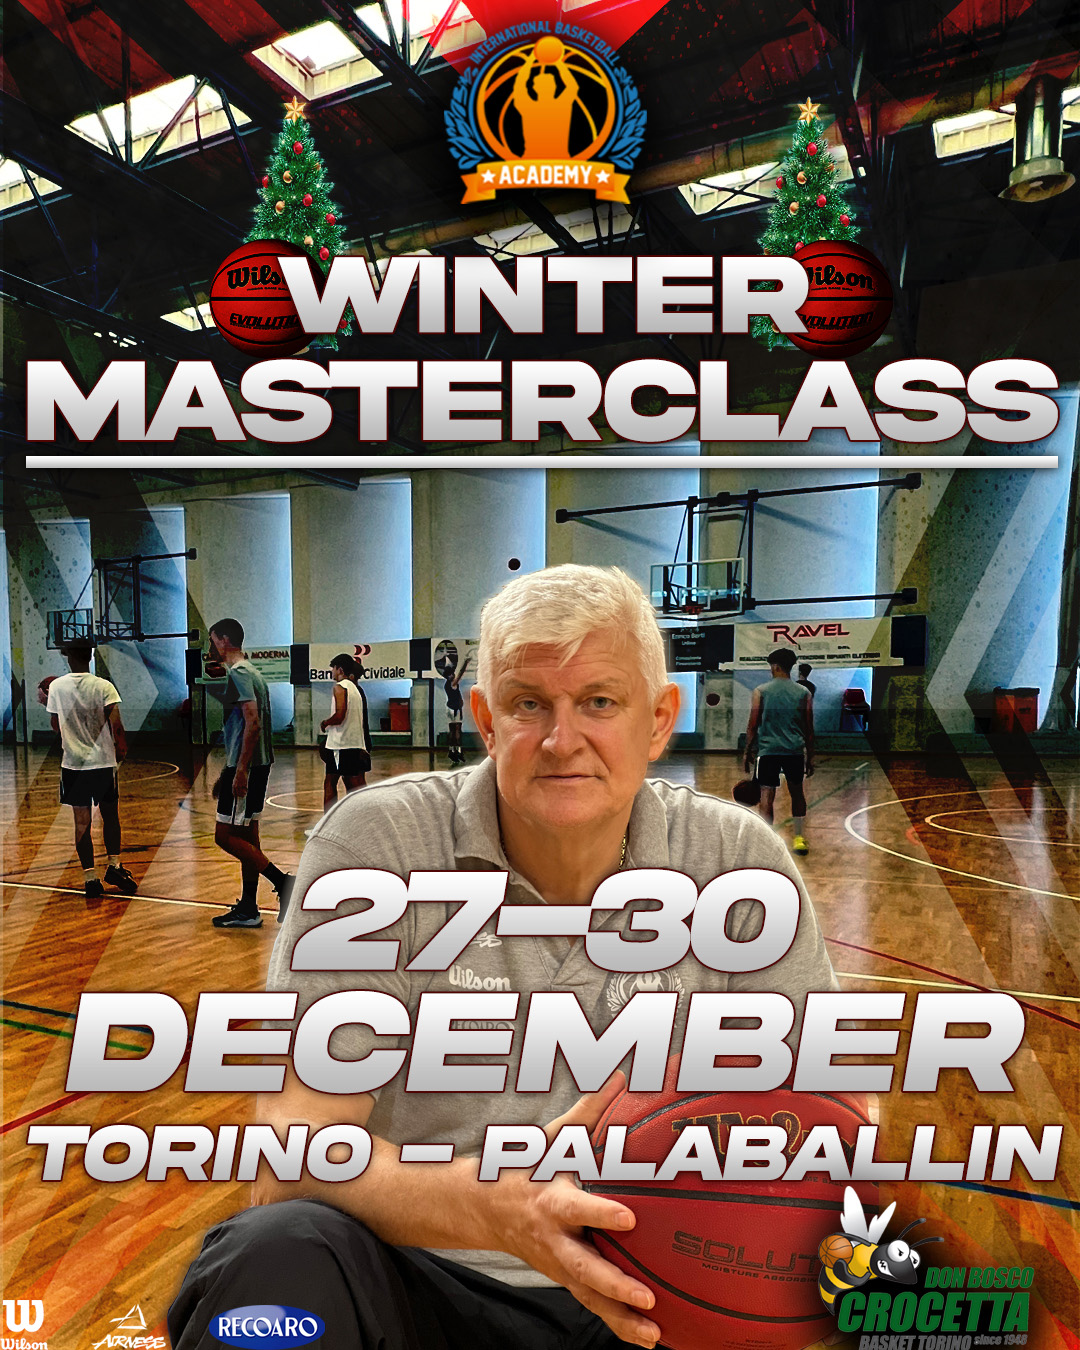 IBA to organize an Easter Masterclass in Udine in March